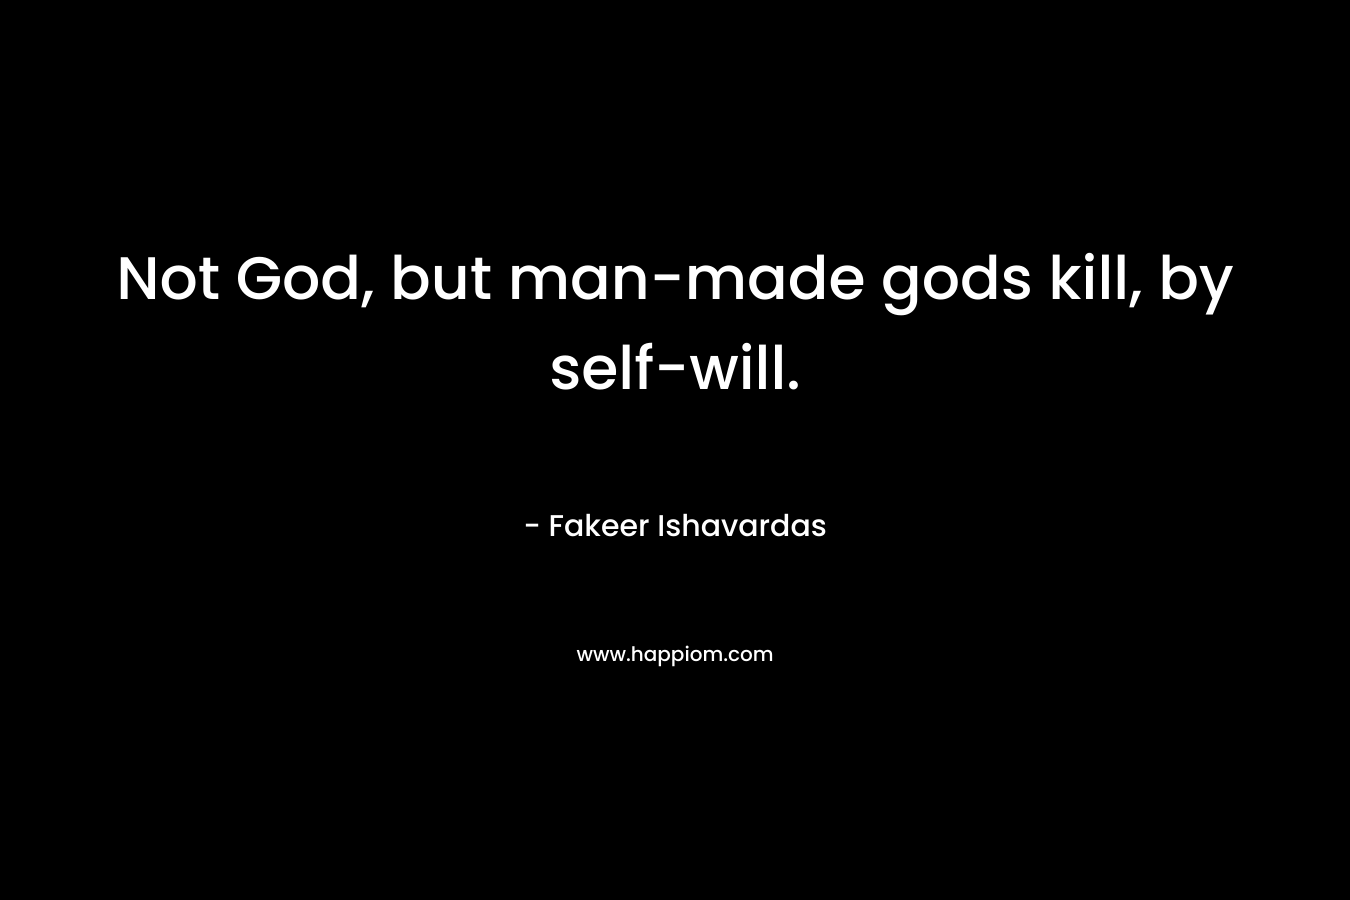 Not God, but man-made gods kill, by self-will.